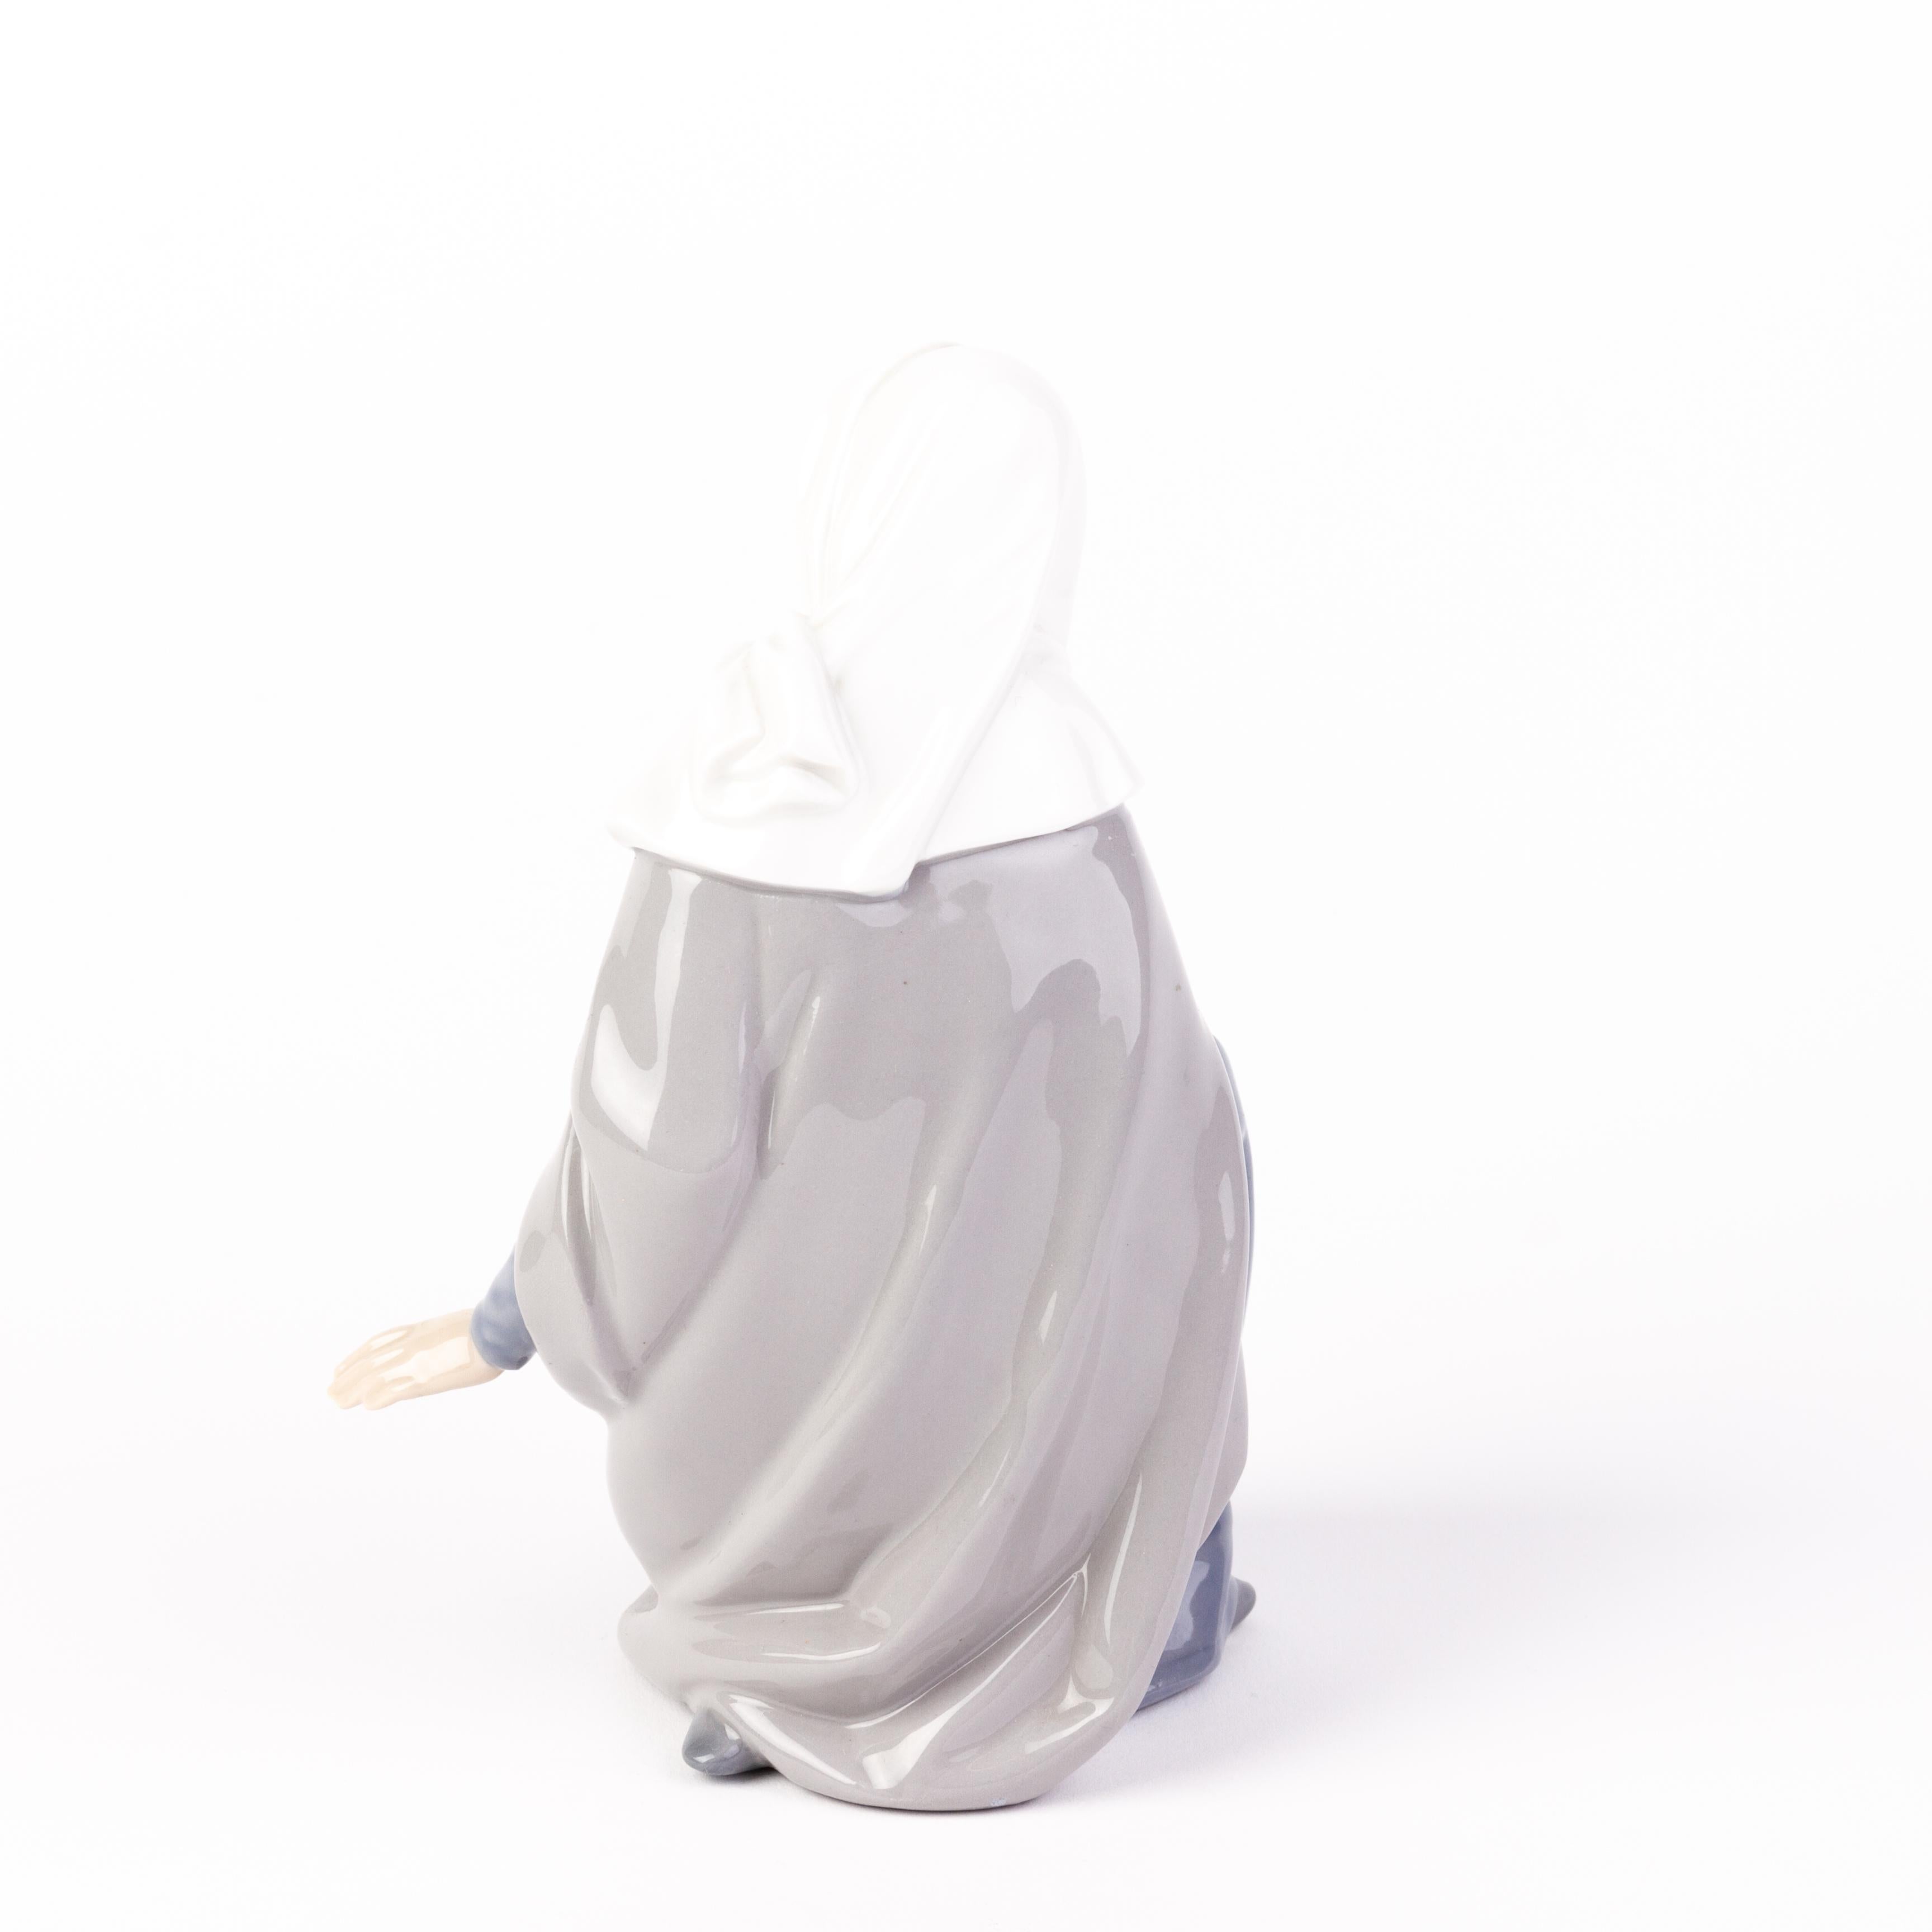 Nao Lladro Fine Porcelain Virgin Mary Figure  In Good Condition For Sale In Nottingham, GB